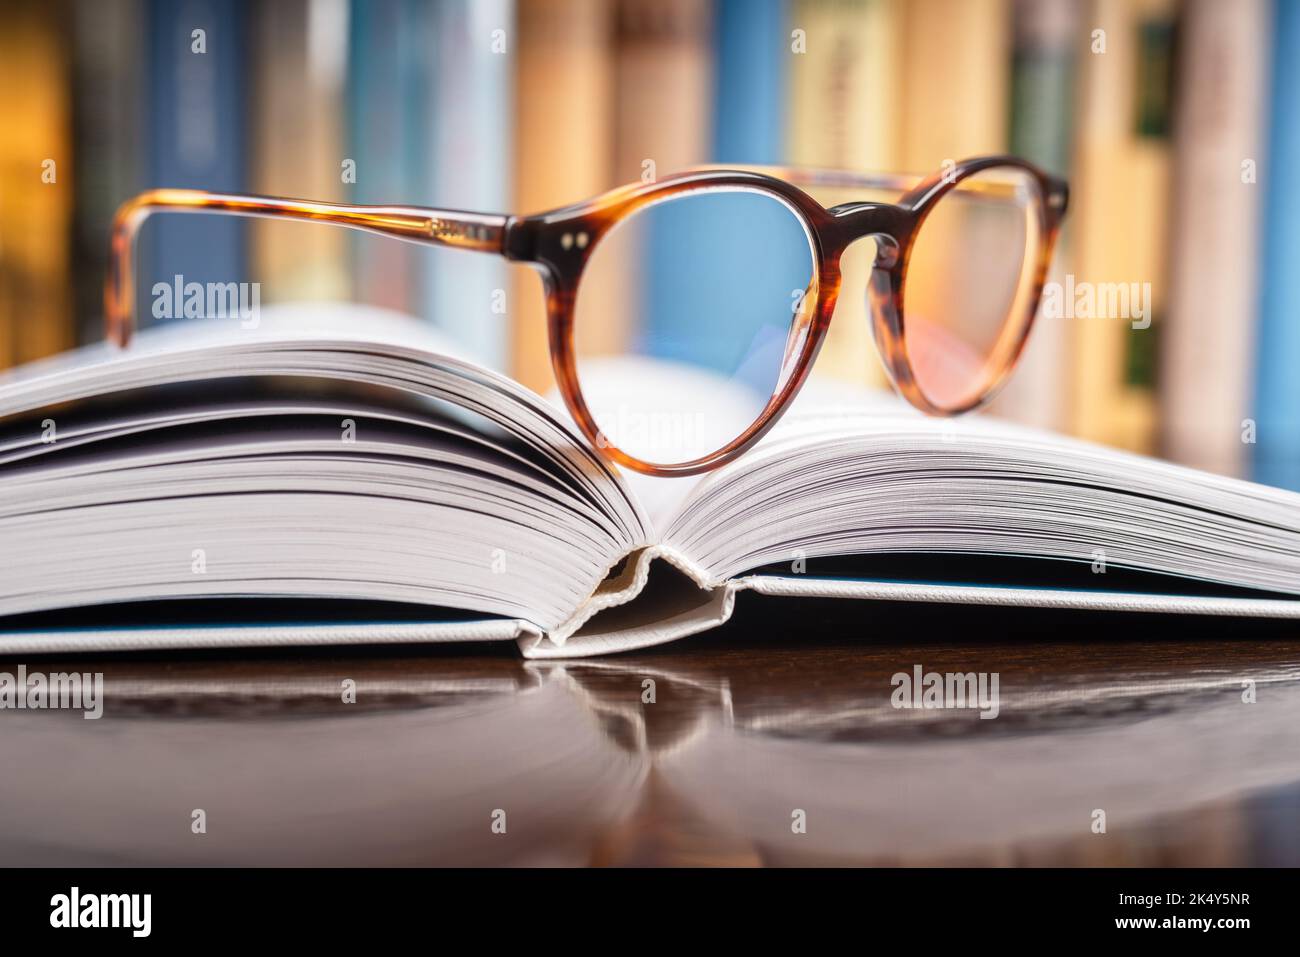 Closeup of reading glasses lying on opened book in library Stock Photo